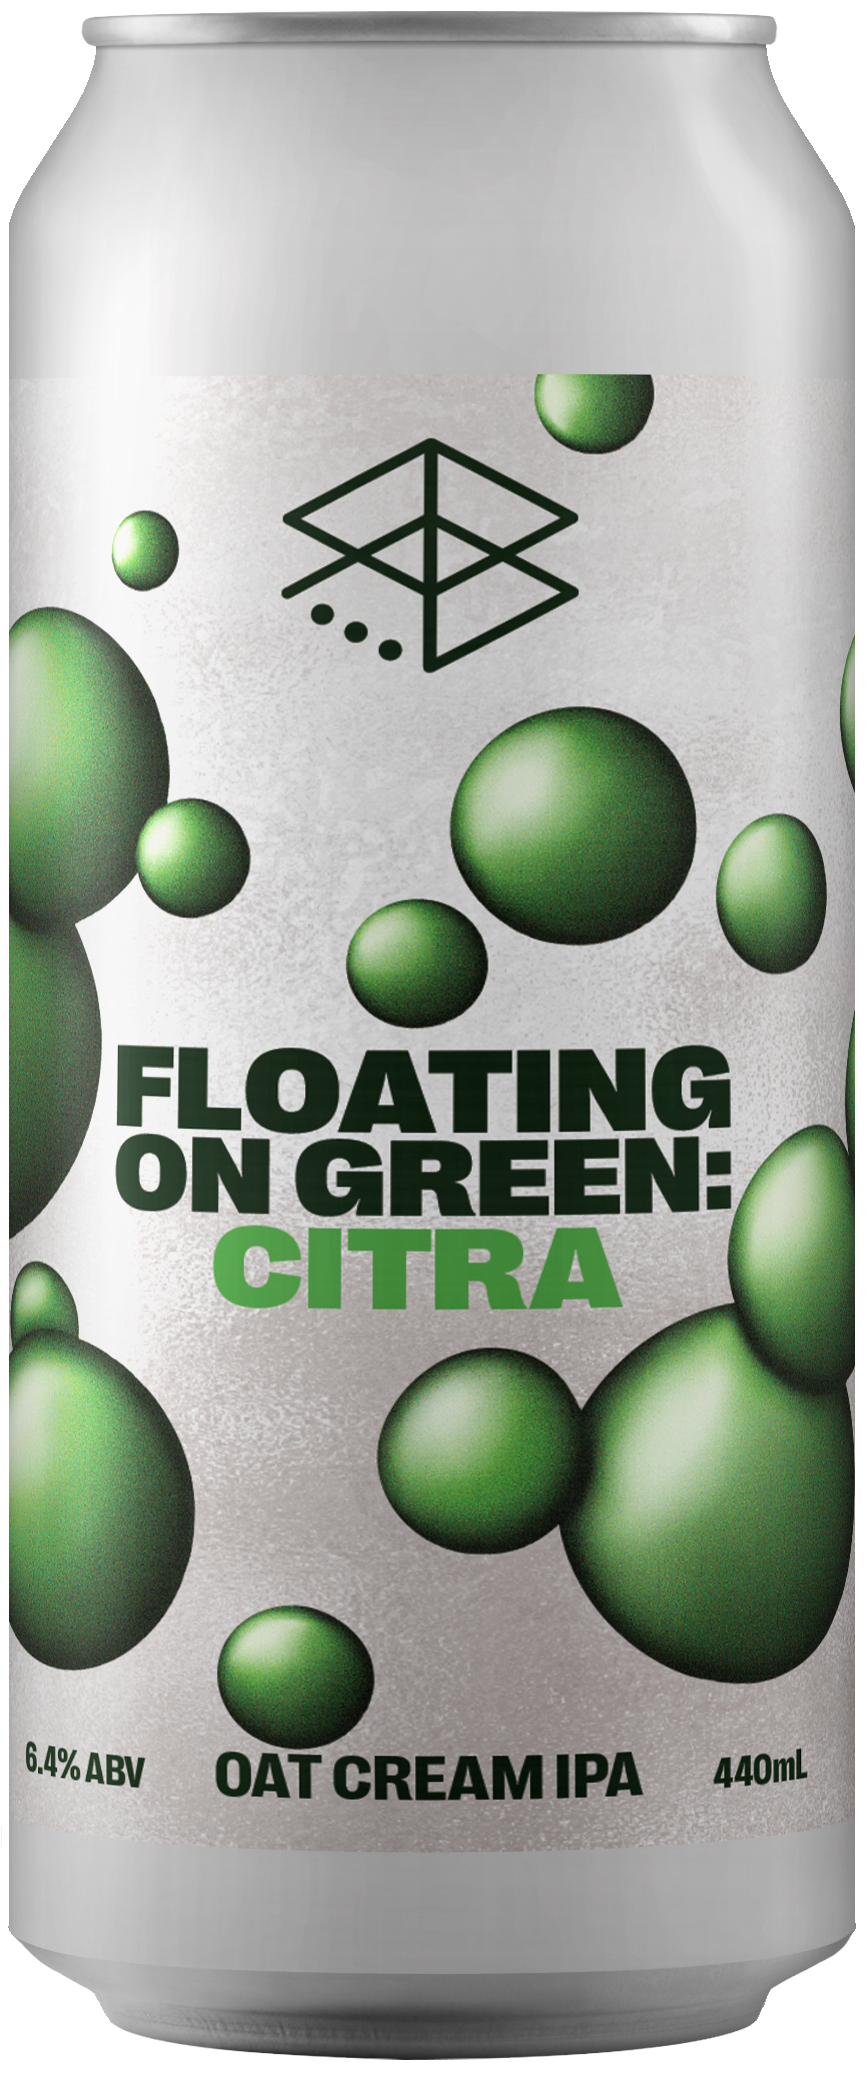 Floating on Green: Citra - Oat Cream IPA